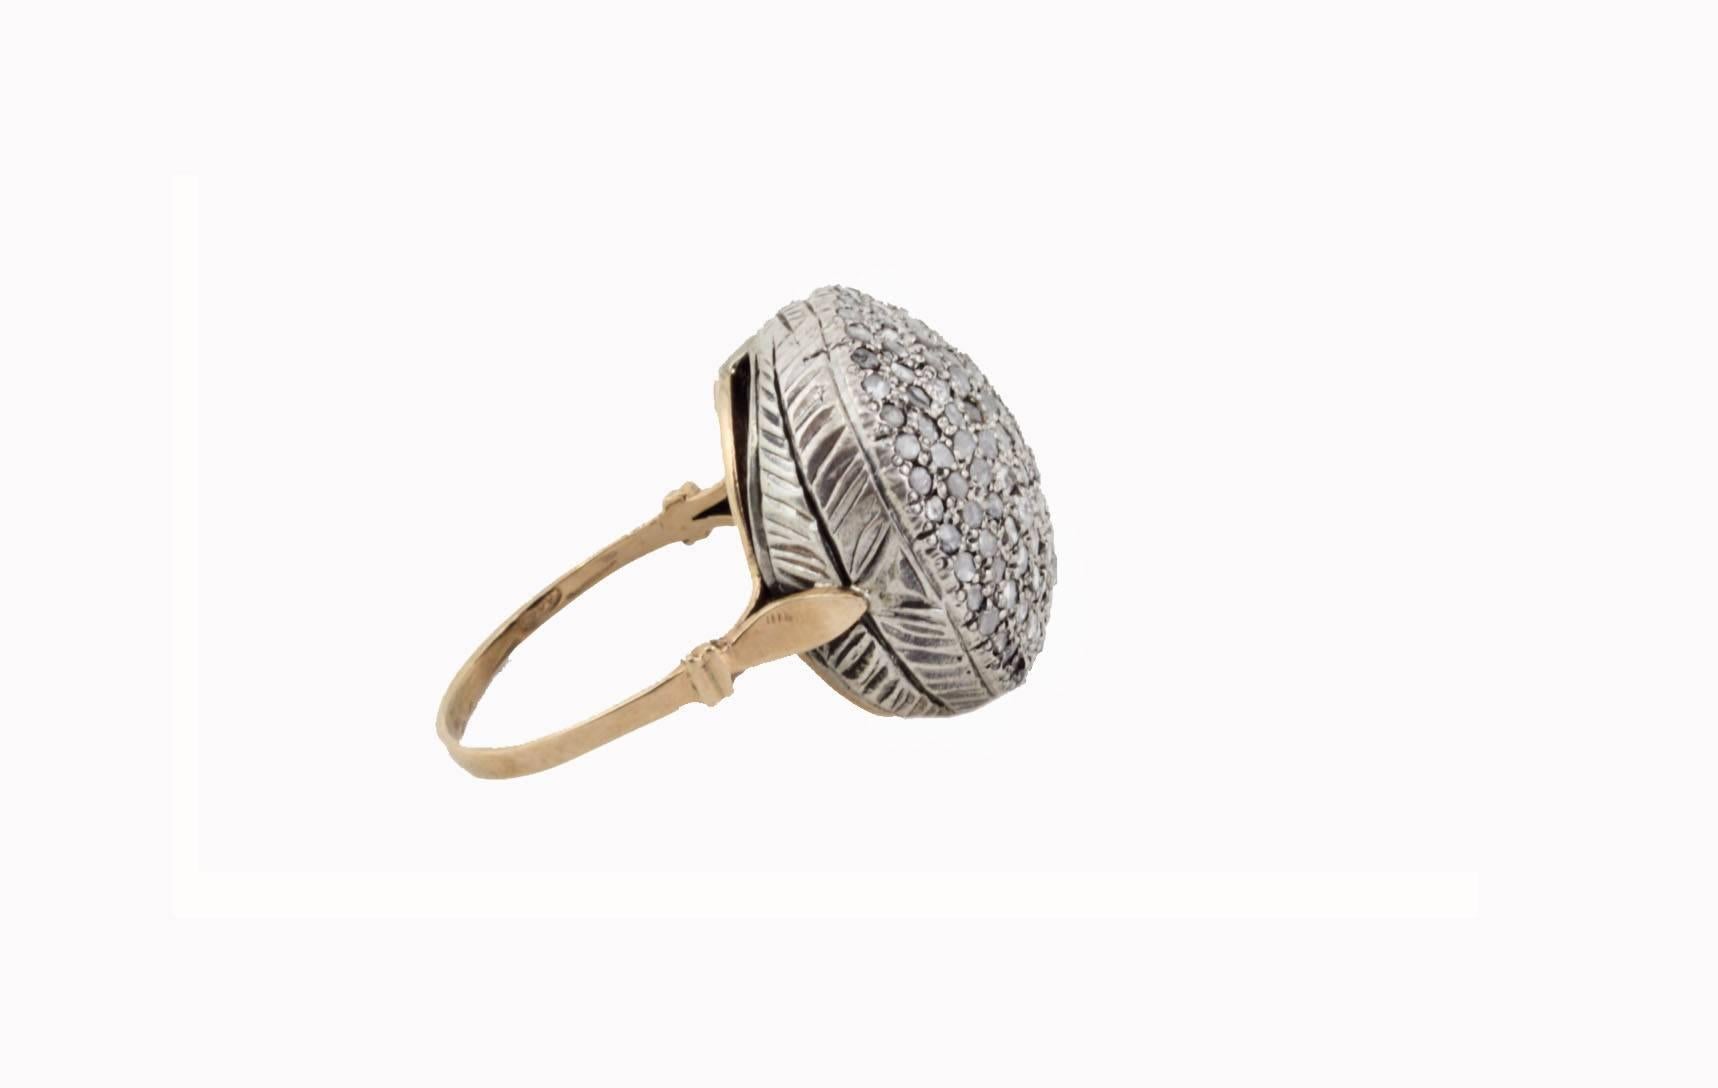 shipping policy: 
No additional costs will be added to this order.
Shipping costs will be totally covered by the seller (customs duties included). 


Shiny fashion ring , composed of diamonds all is mounted in 9 Kt rose gold and silver.
Ring Size